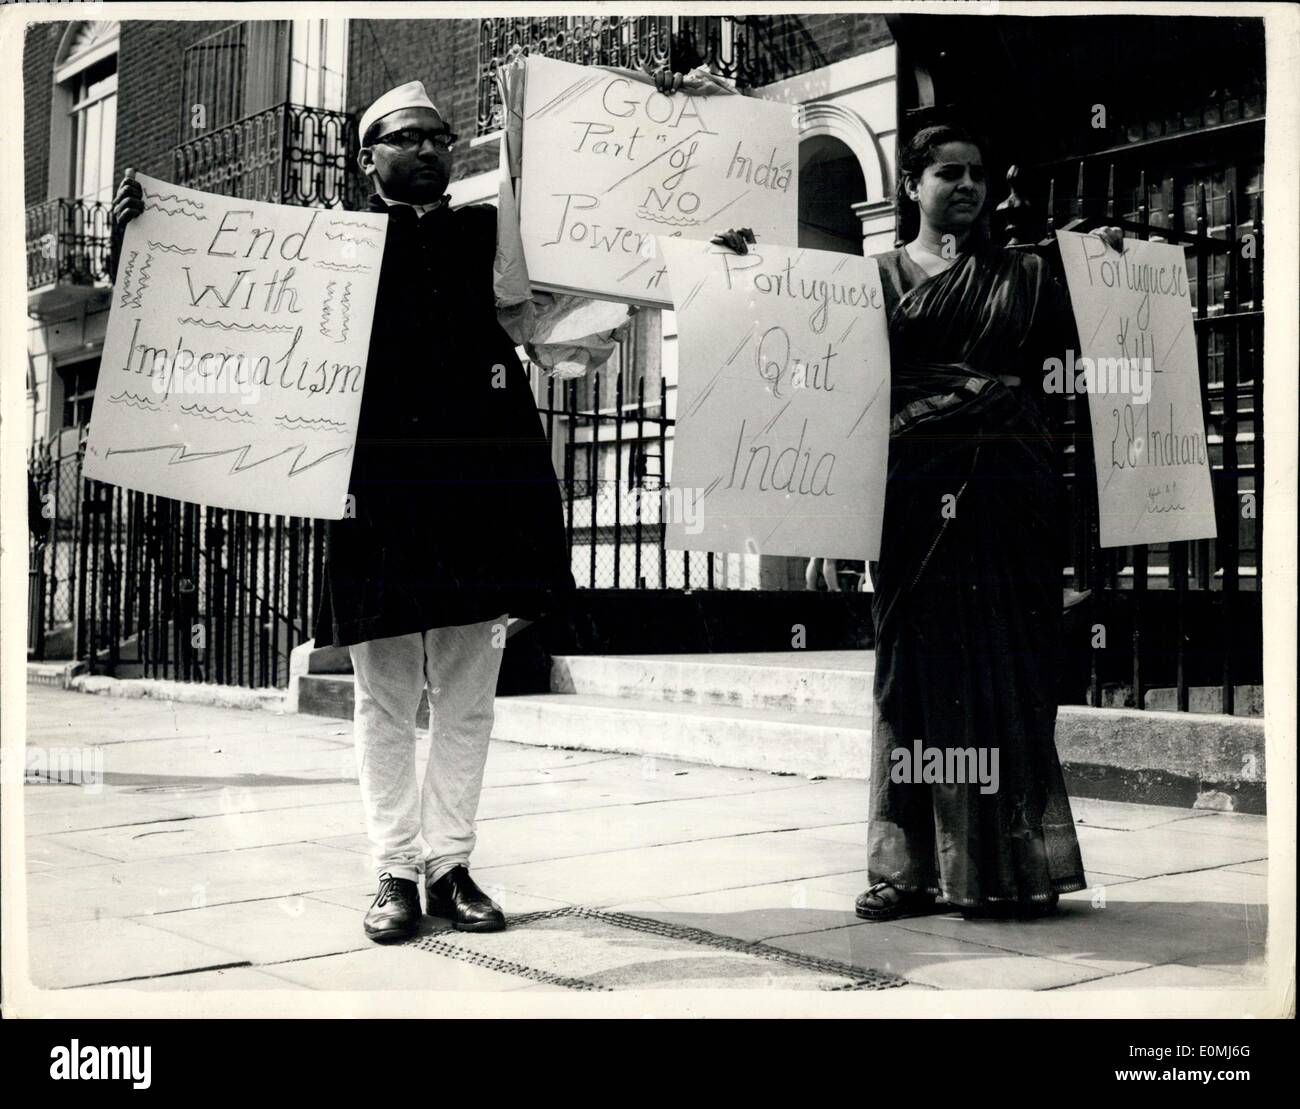 Aug. 17, 1955 - Indians Demonstrate Outside Portuguese Embassy: Students and others - Indian Nationals were to be seen outside the Portuguese Embassy in London this morning demonstrating against the recent clashes in GOA - the Portuguese territory in India. Some of the demonstrators are staging a hunger strike. Photo Shows: Mr. R.P. Vyas from Bombay - and Mrs. Gautam from Lucknow - in national dress - with their placards - outside the Embassy this morning. Stock Photo